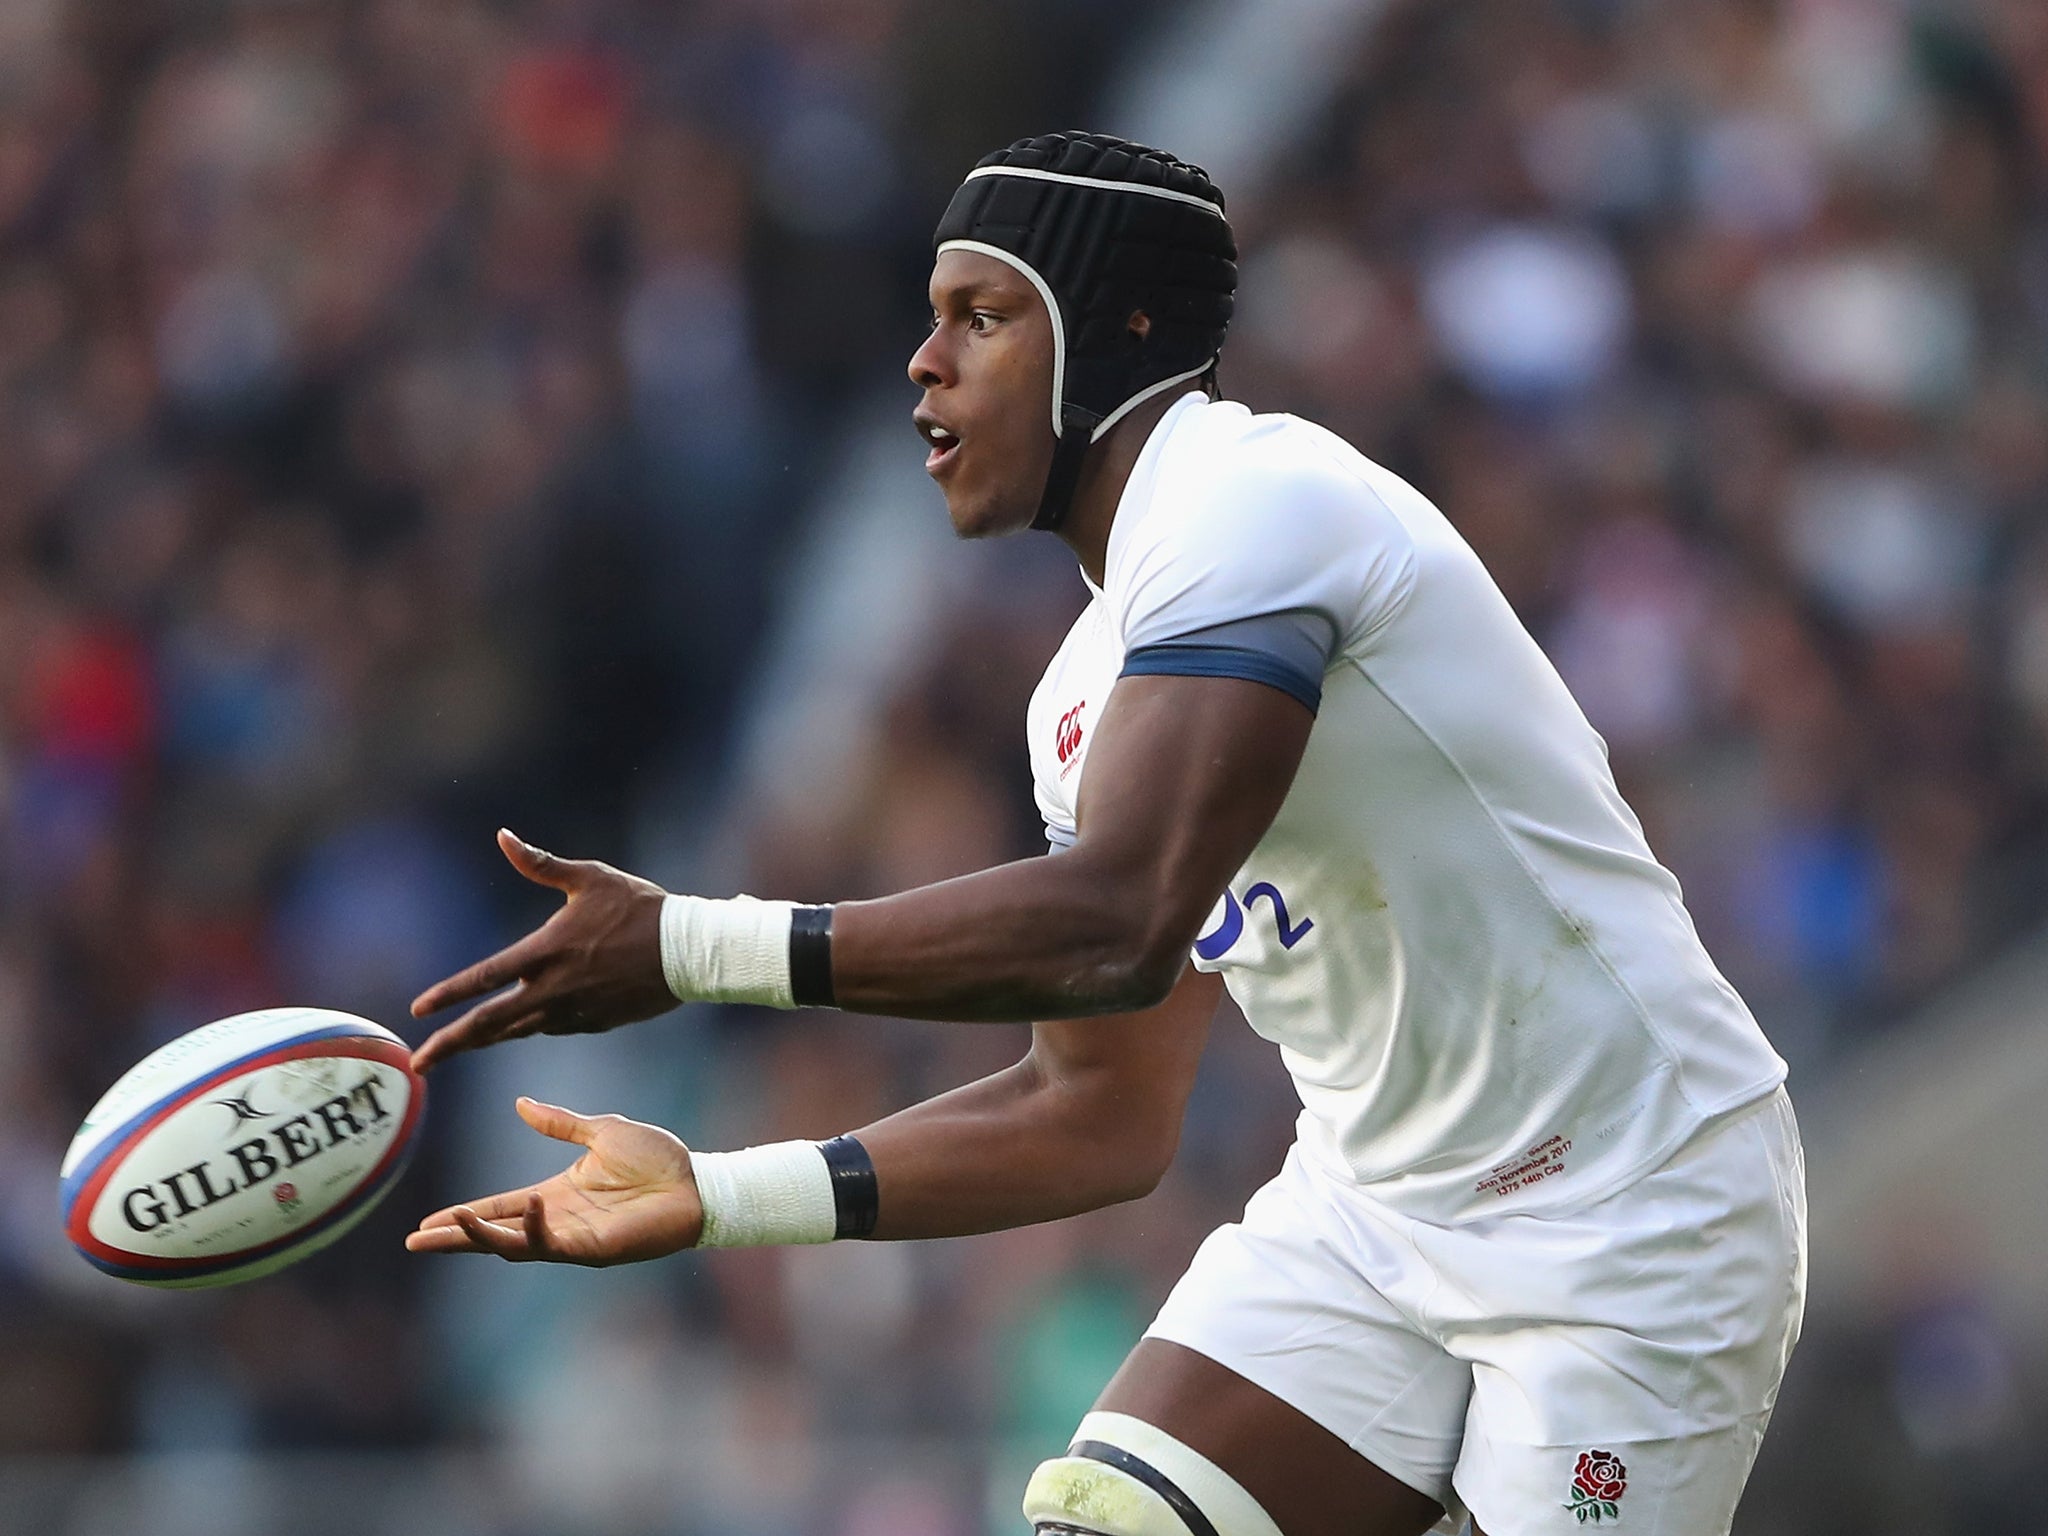 Itoje has not measured up to his form of the previous two years